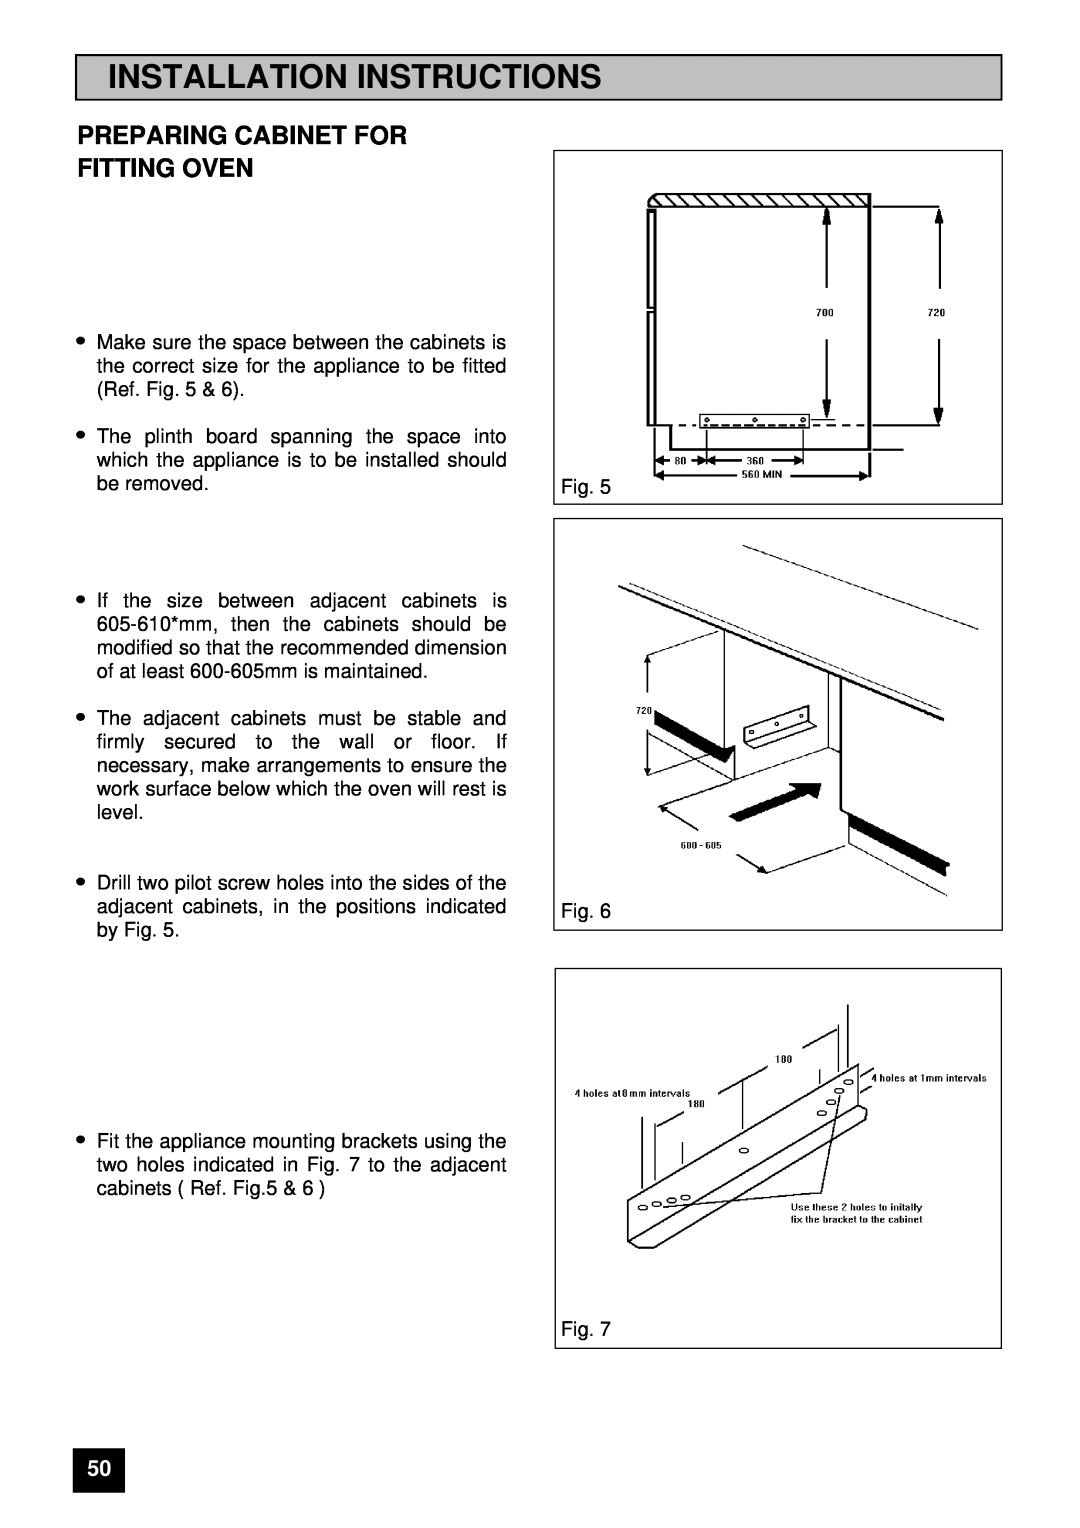 Tricity Bendix E 750 installation instructions Preparing Cabinet For Fitting Oven, Installation Instructions 